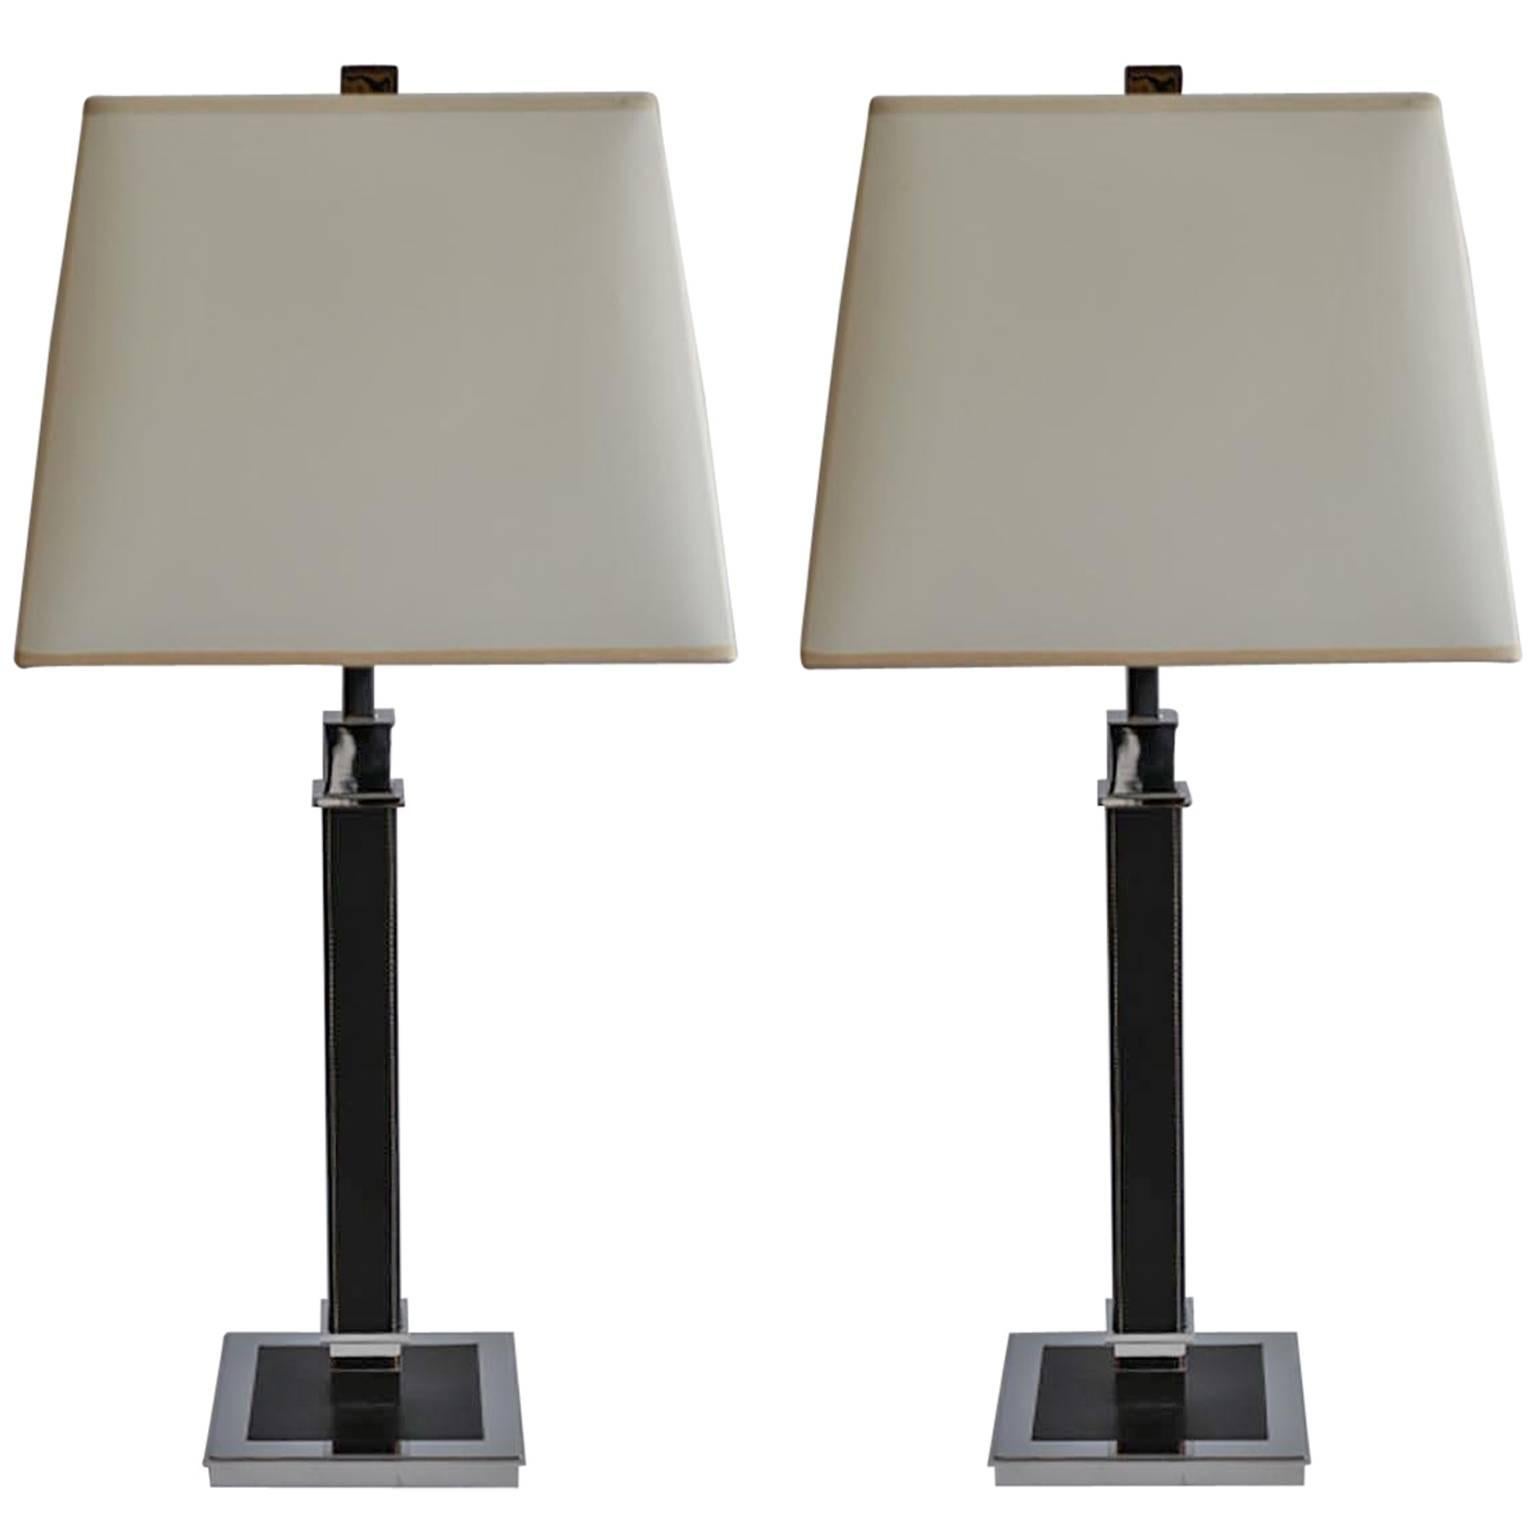 Pair of Ralph Lauren Black Leather and Polished Nickel Table Lamps